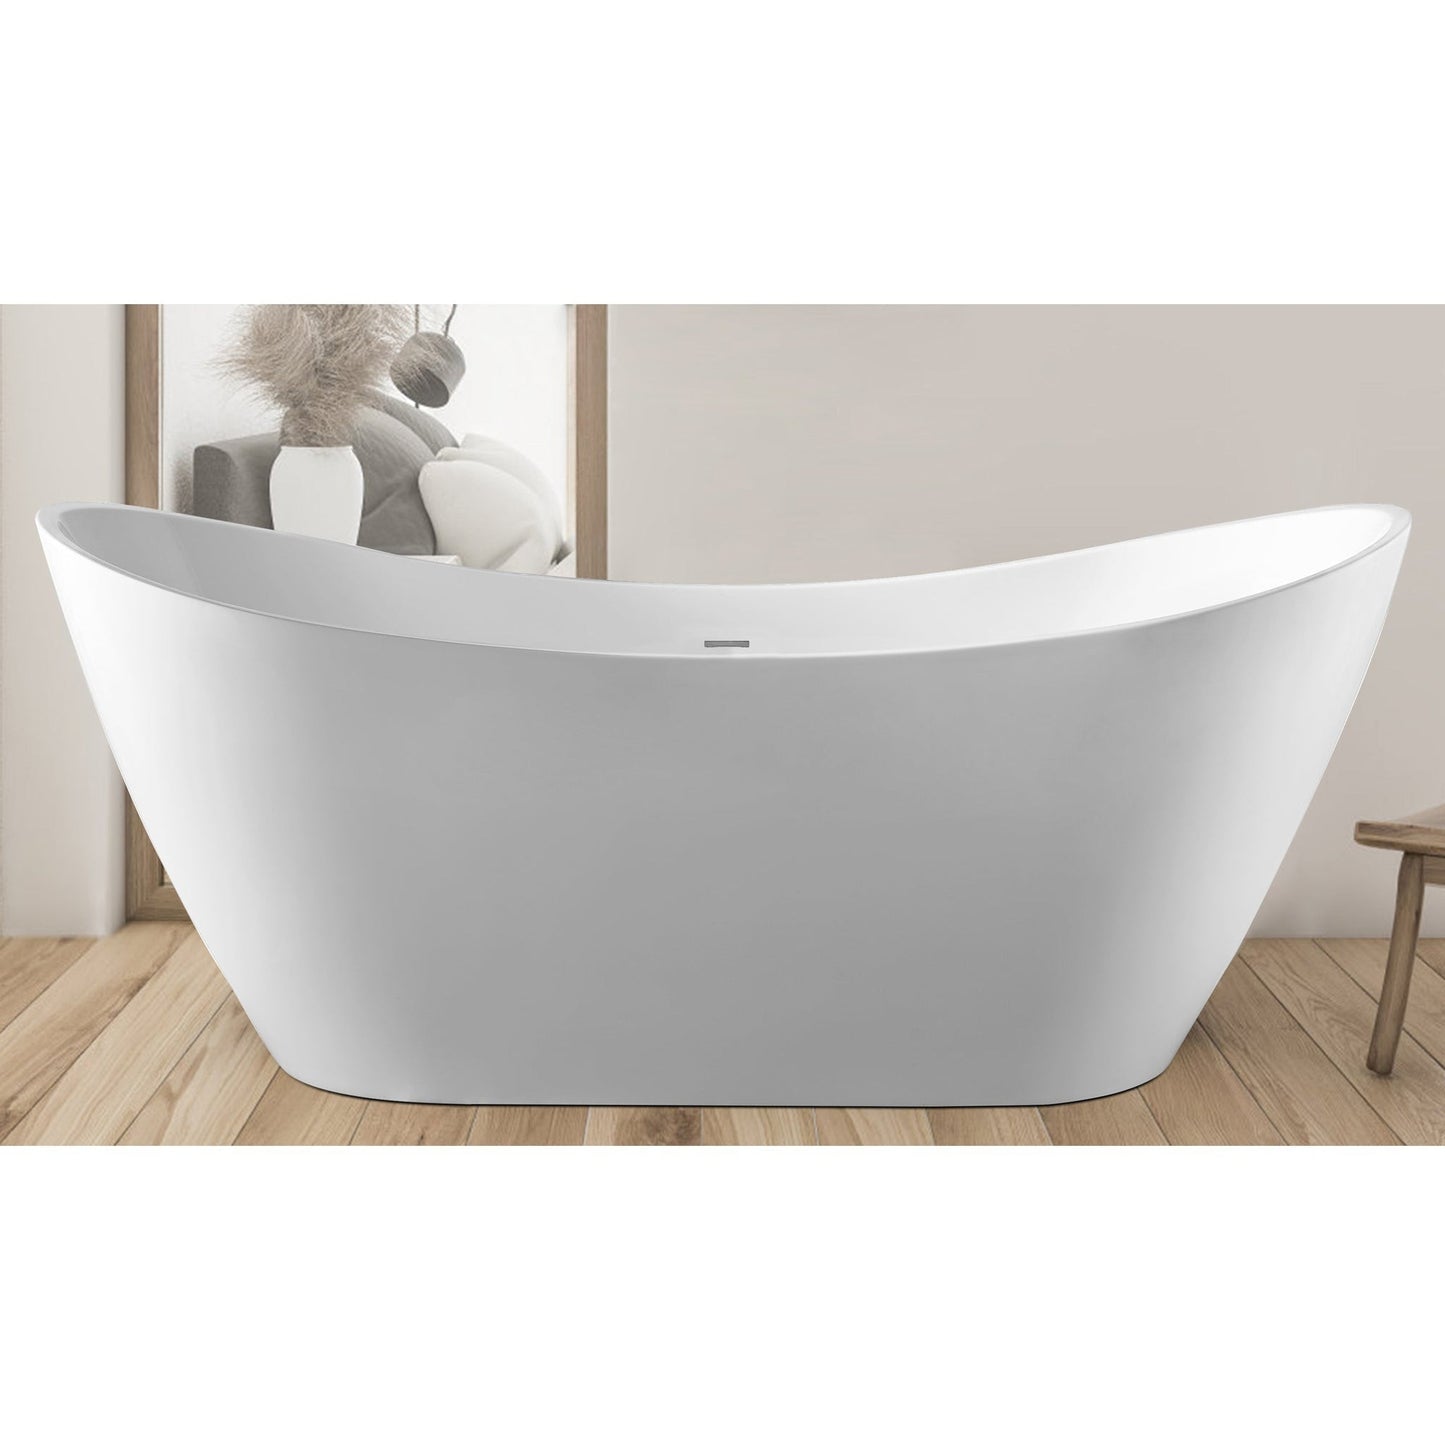 PULSE ShowerSpas 71" W x 29" D Polished White Acrylic Oval Freestanding Tub With Overflow and Stainless Steel Brackets